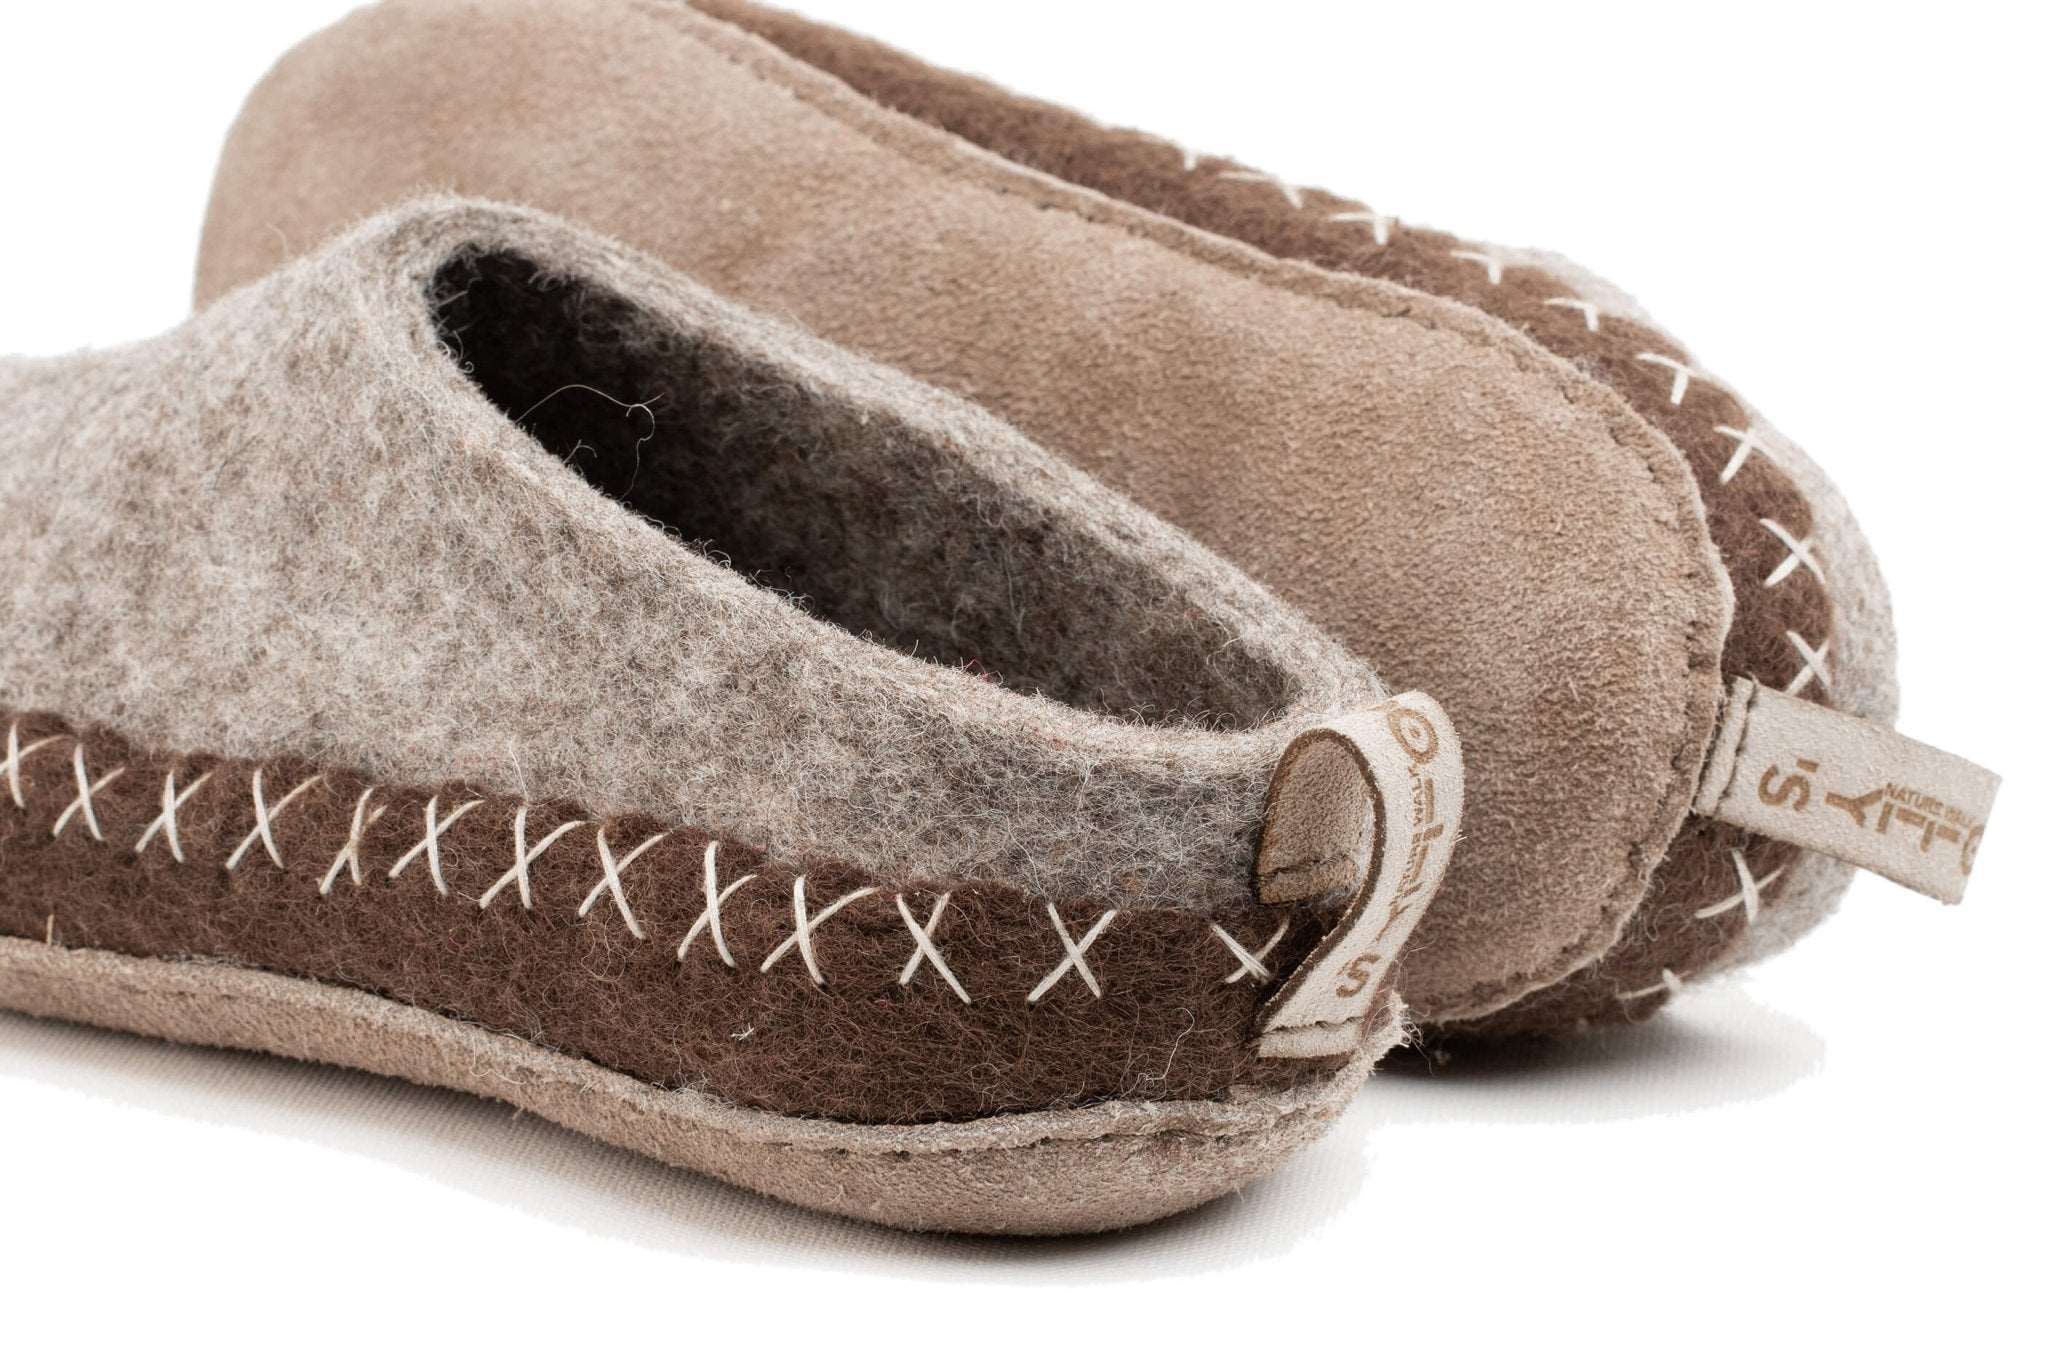 Indoor Open Heel Slipper With Leather Sole - Natural Brown & Light Brown - Woollyes